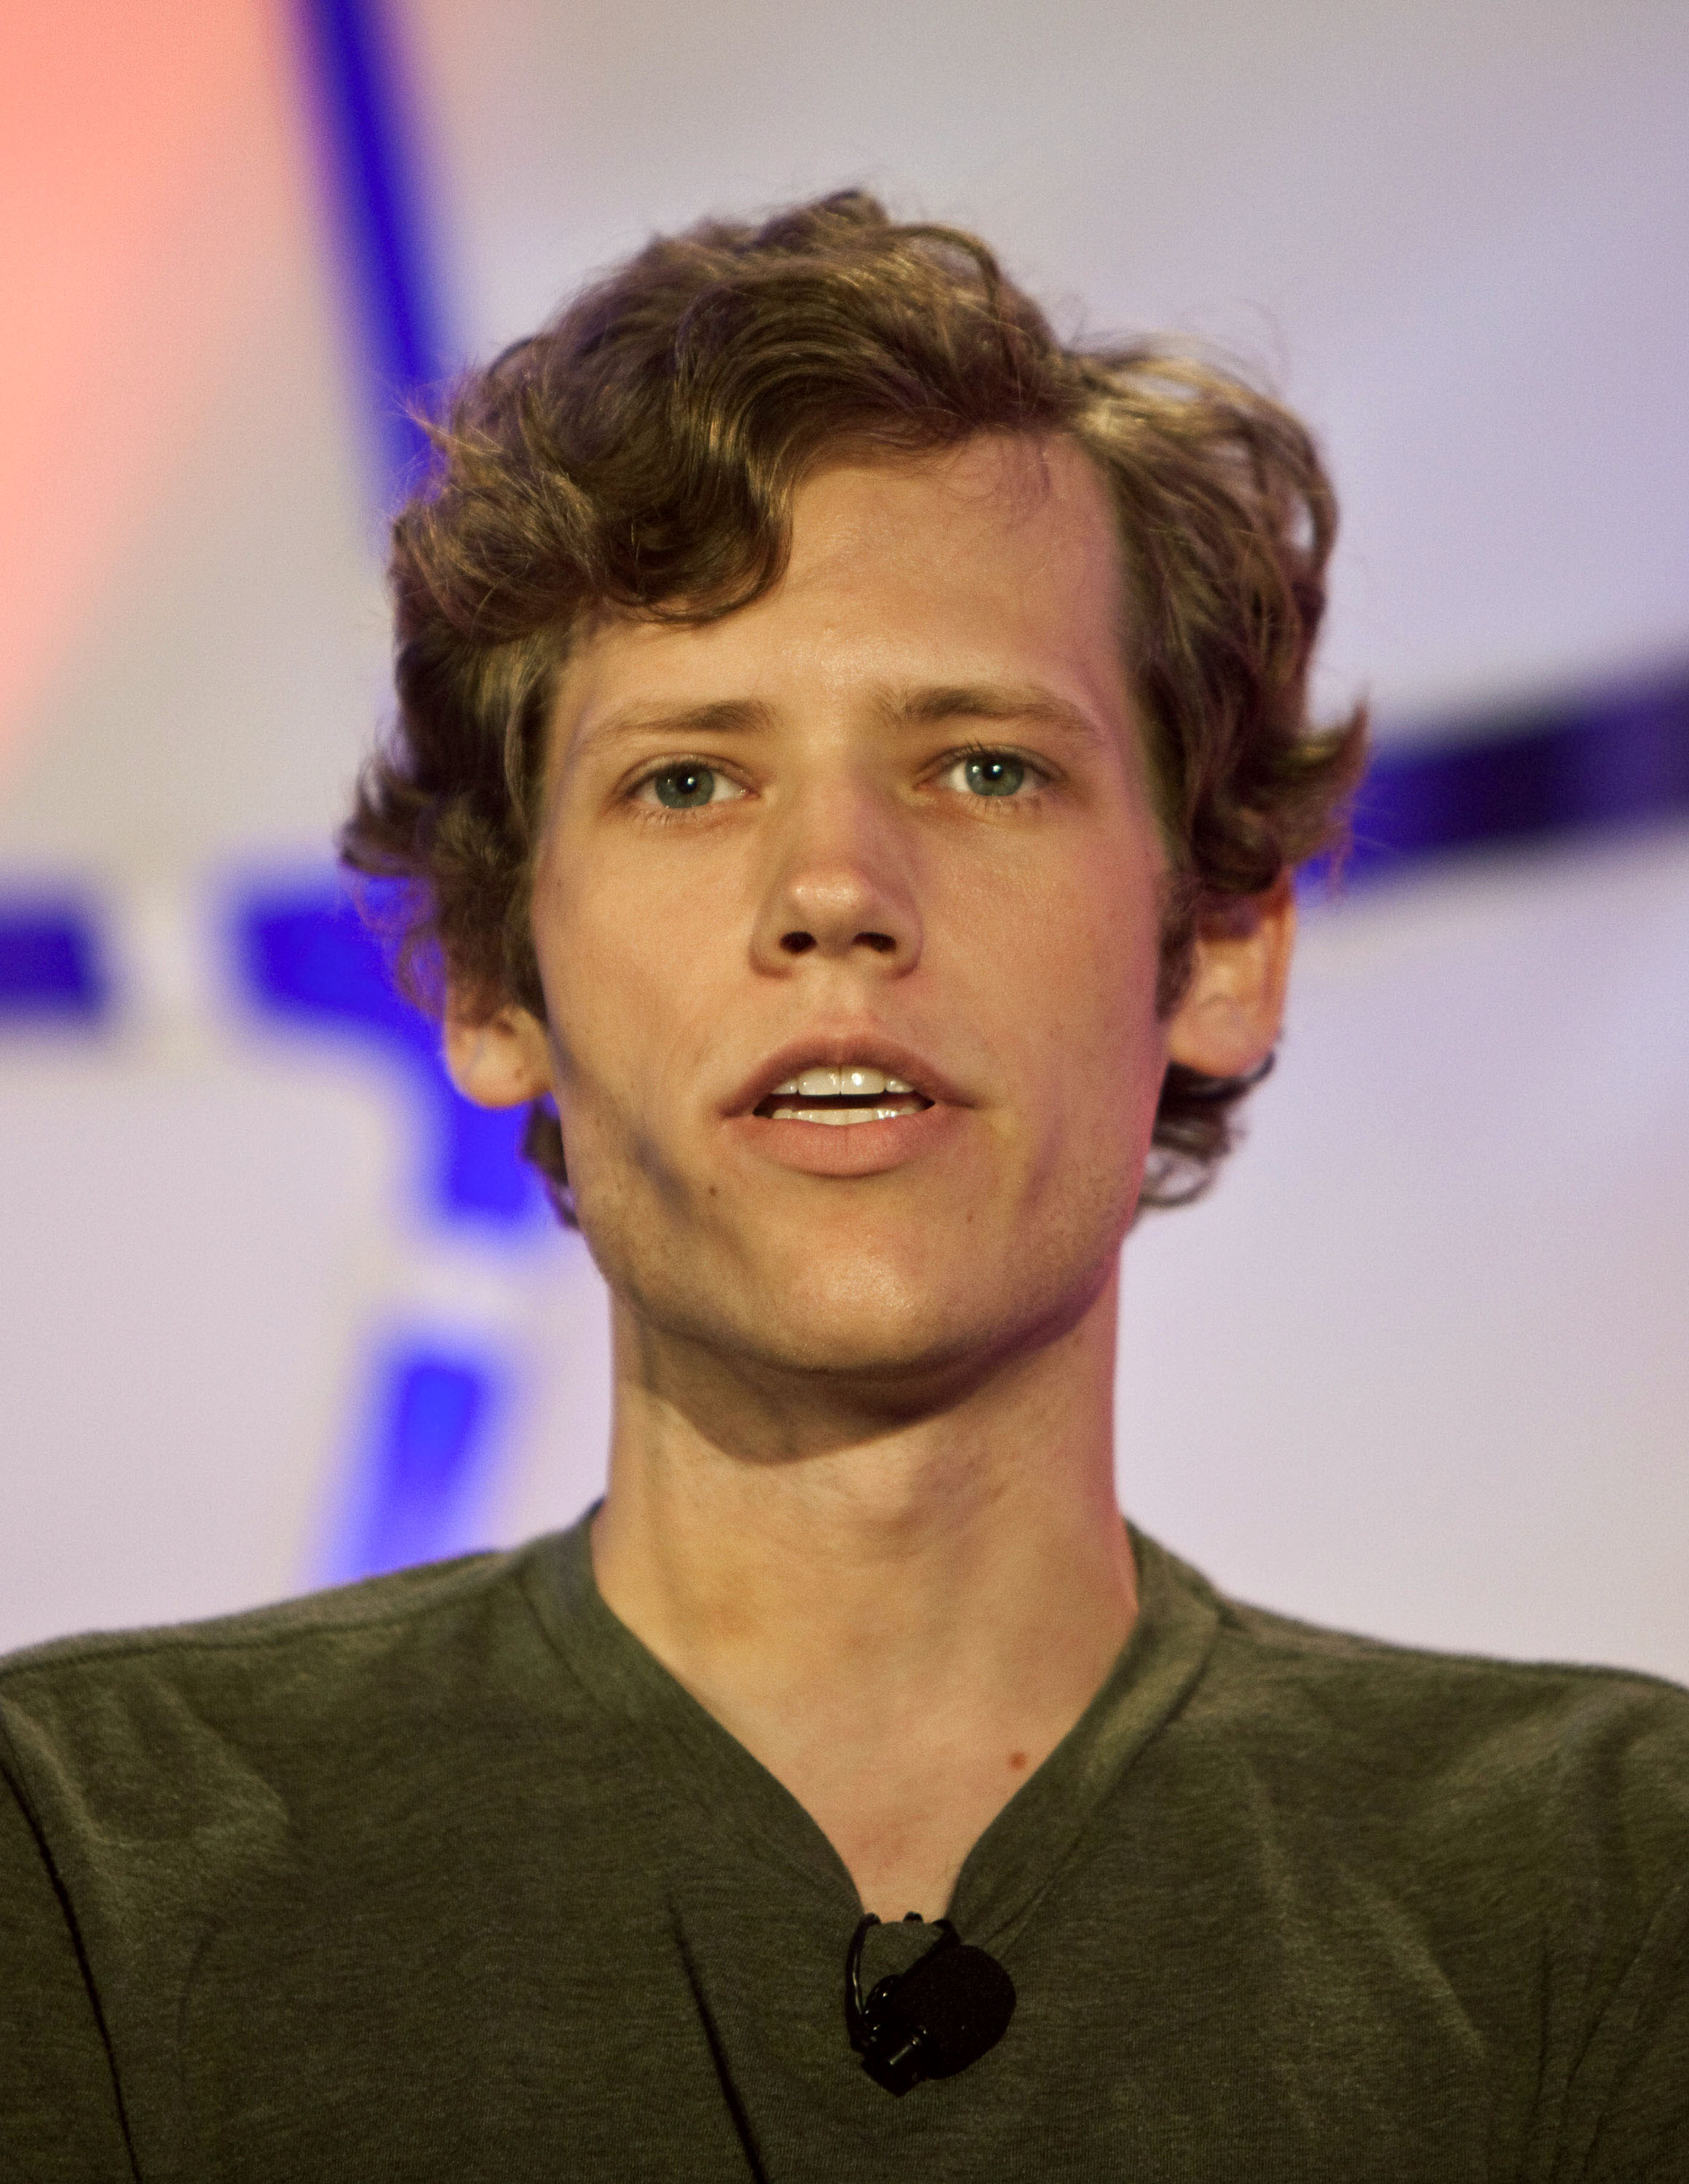 Christopher Poole, founder of 4chan, speaks during the TechCrunch Disrupt conference in New York, U.S., May 25, 2010 (Bloomberg/Getty Images)